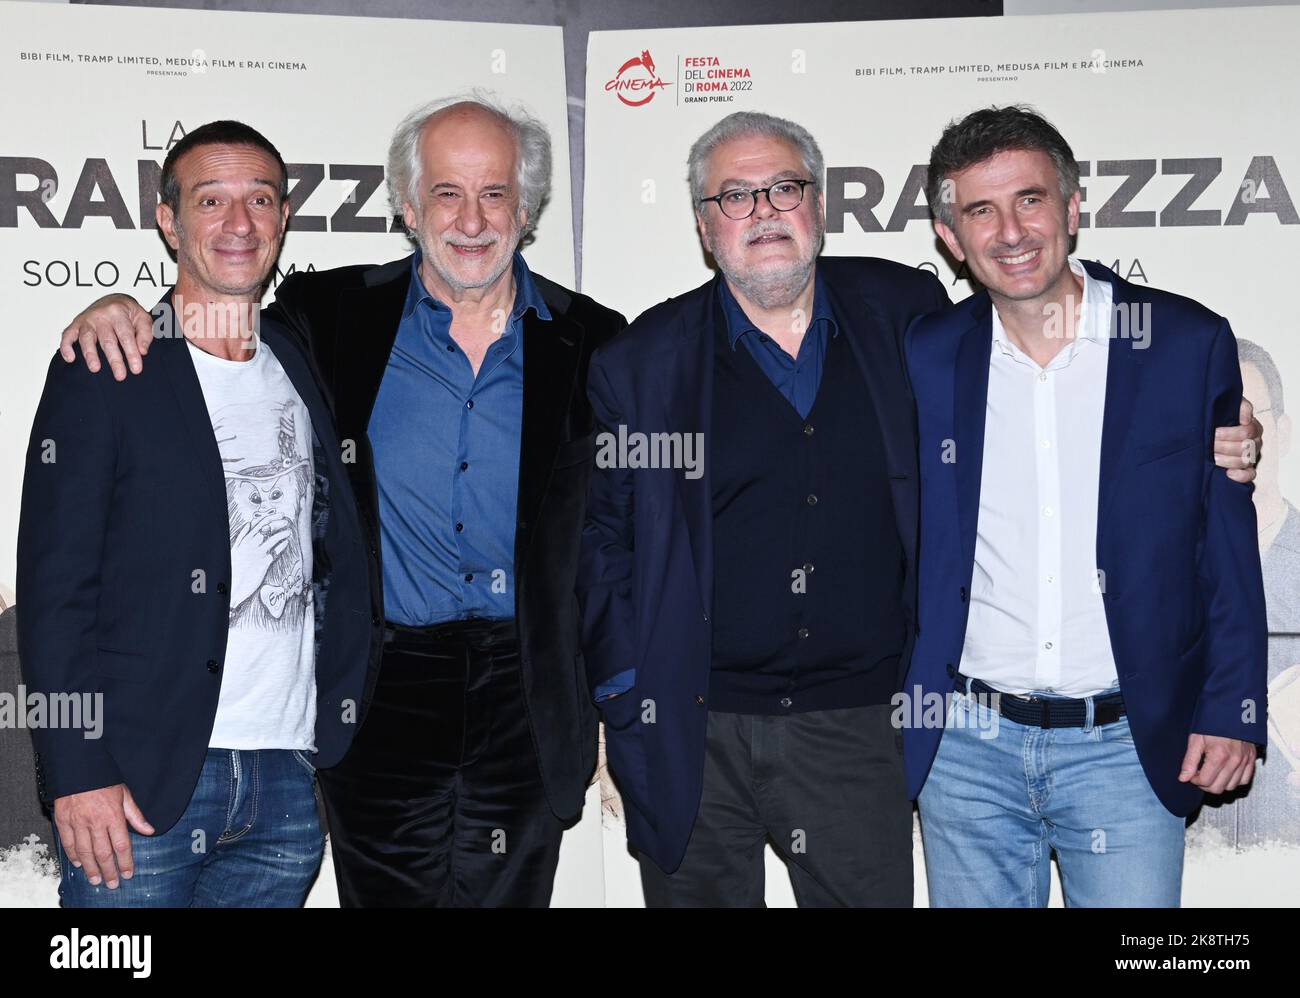 Milan, Italy. 24th Oct, 2022. Milan, Italy The strangeness feature by Roberto Andò, premiered at the Rome Film Festival with leading actors Toni Servillo, Ficarra and Picone In the picture: Roberto Andò, Toni Servillo, Ficarra and Picone Credit: Independent Photo Agency/Alamy Live News Stock Photo